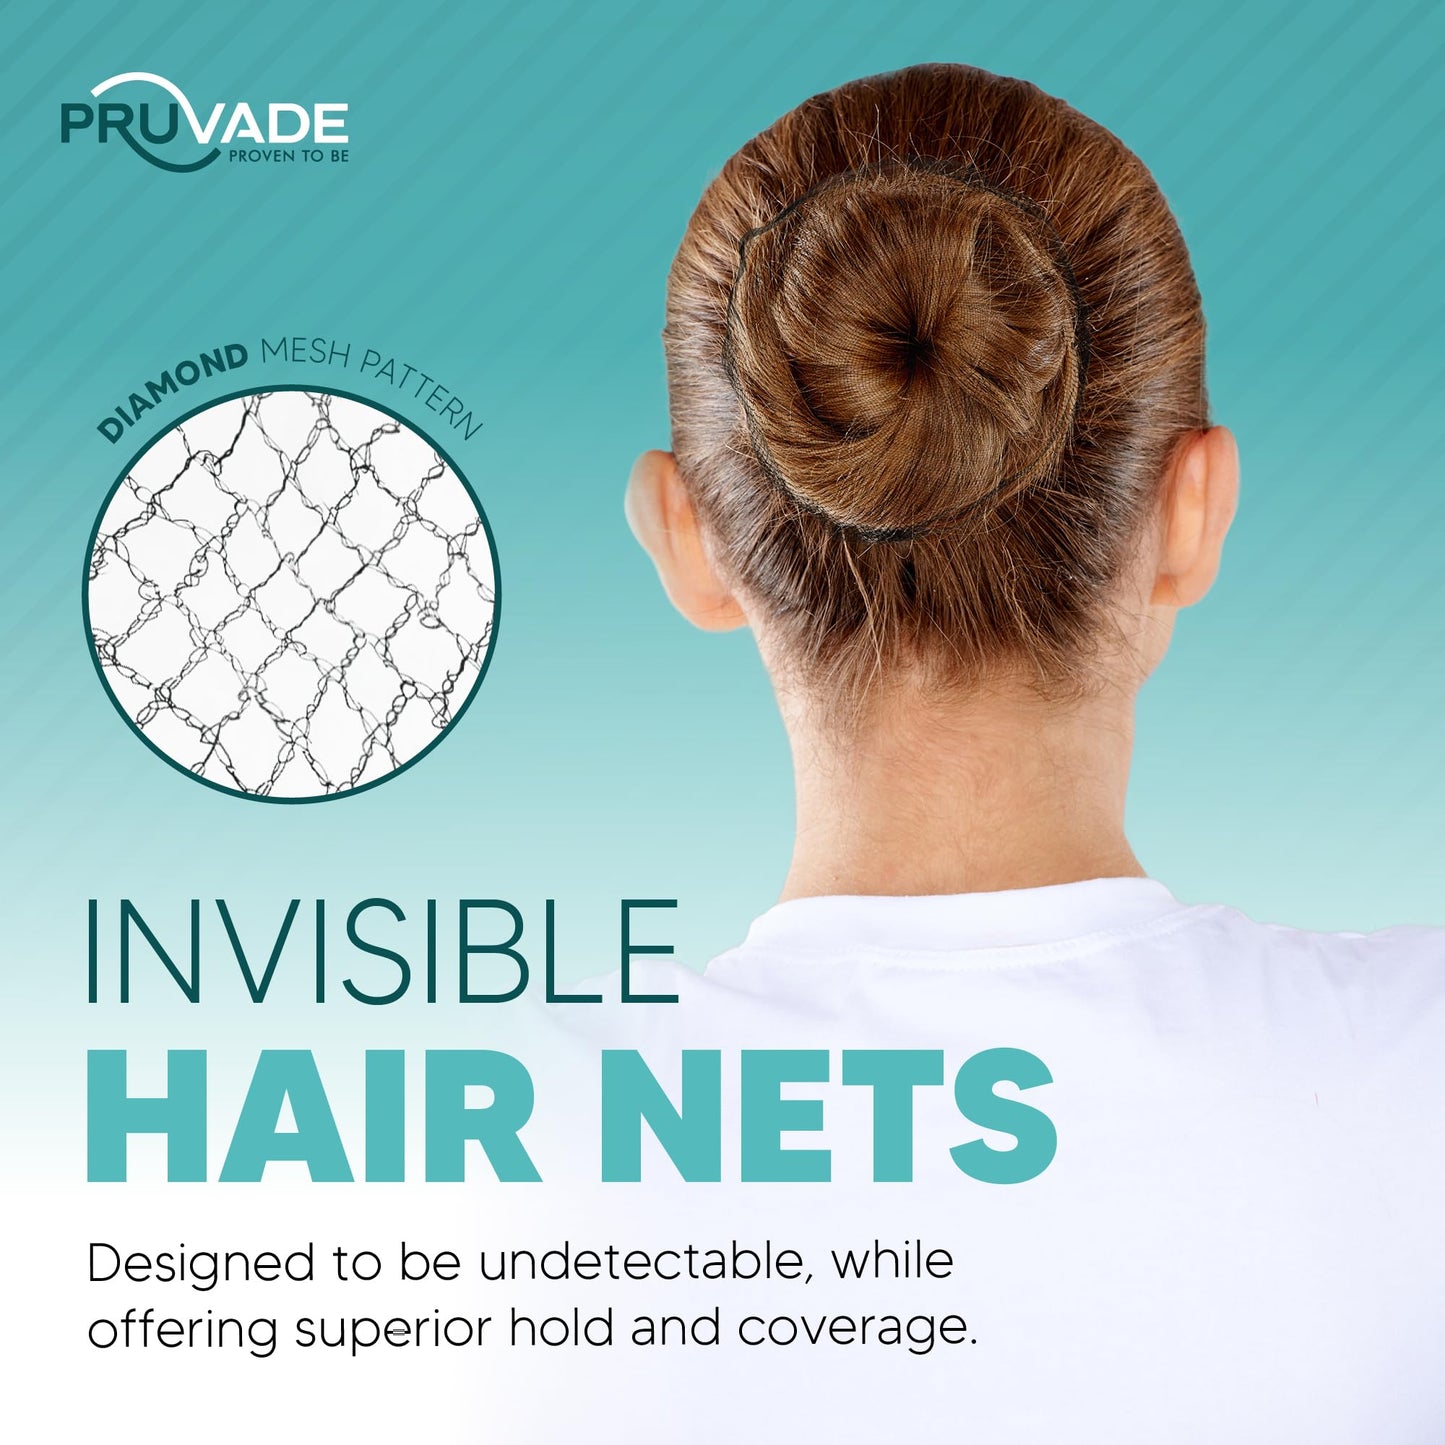 Pruvade - Invisible Hair Nets for Women & Men | Pack of 100 | Elastic 24" Mesh Hair Net for Buns, Long Hair & Short Hair - Hairnets for Ballet Dancers, Sleeping, Wig Storage, Food Service & More